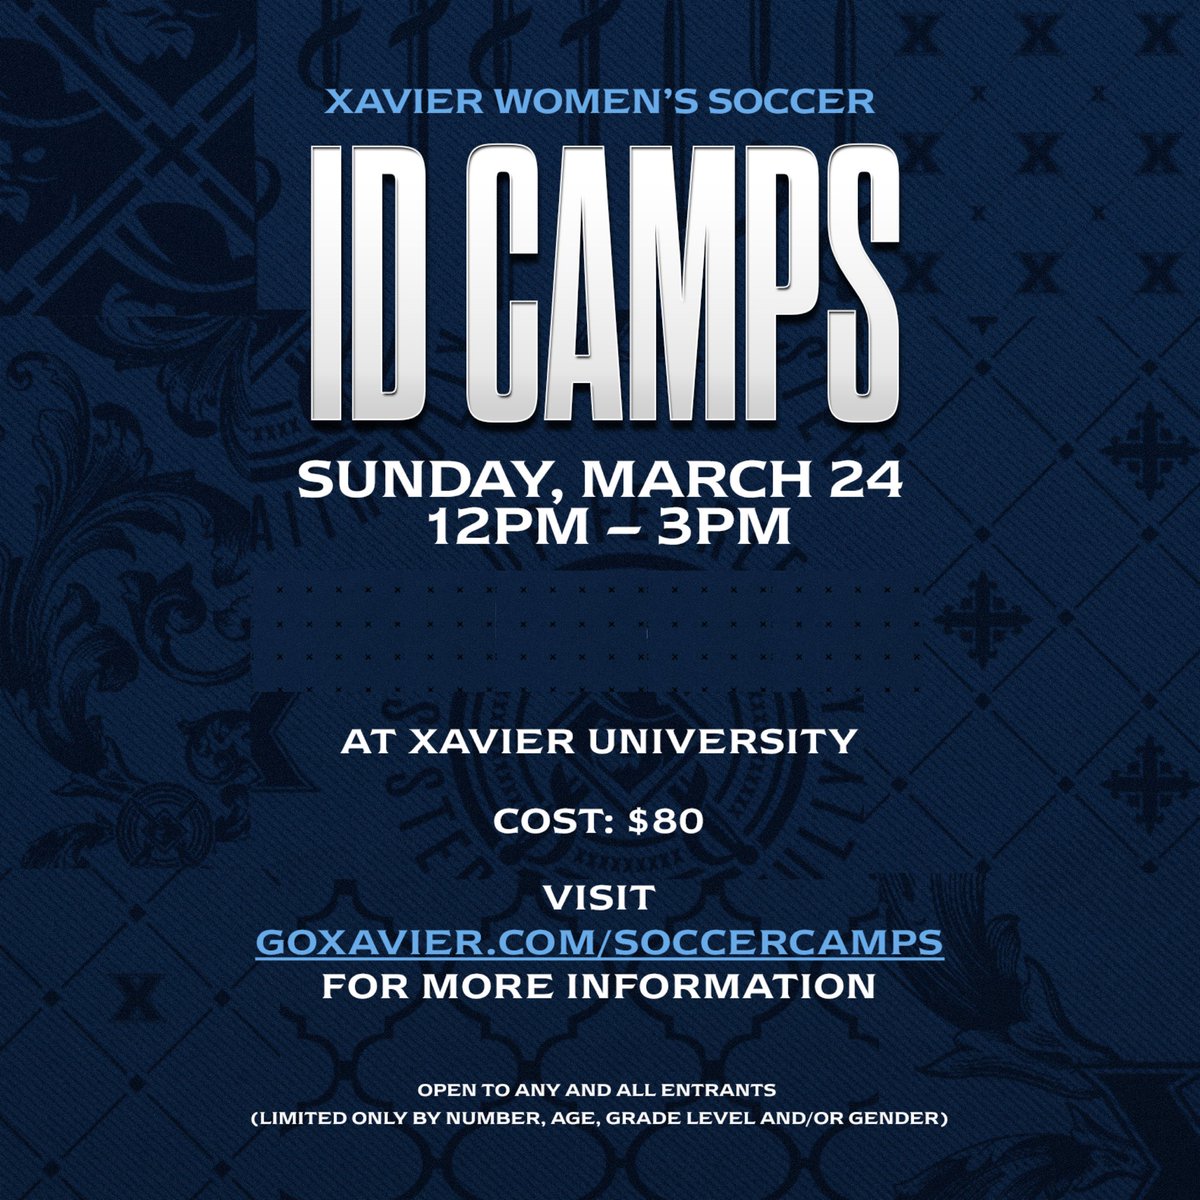 Still time to register for our ID Camp next weekend. Come watch our spring game vs Ashland (6pm k/o) on Saturday and showcase your talent to our coaching staff on Sunday. #perfectweekend Link to Register: xavierwomenssoccercamps.totalcamps.com